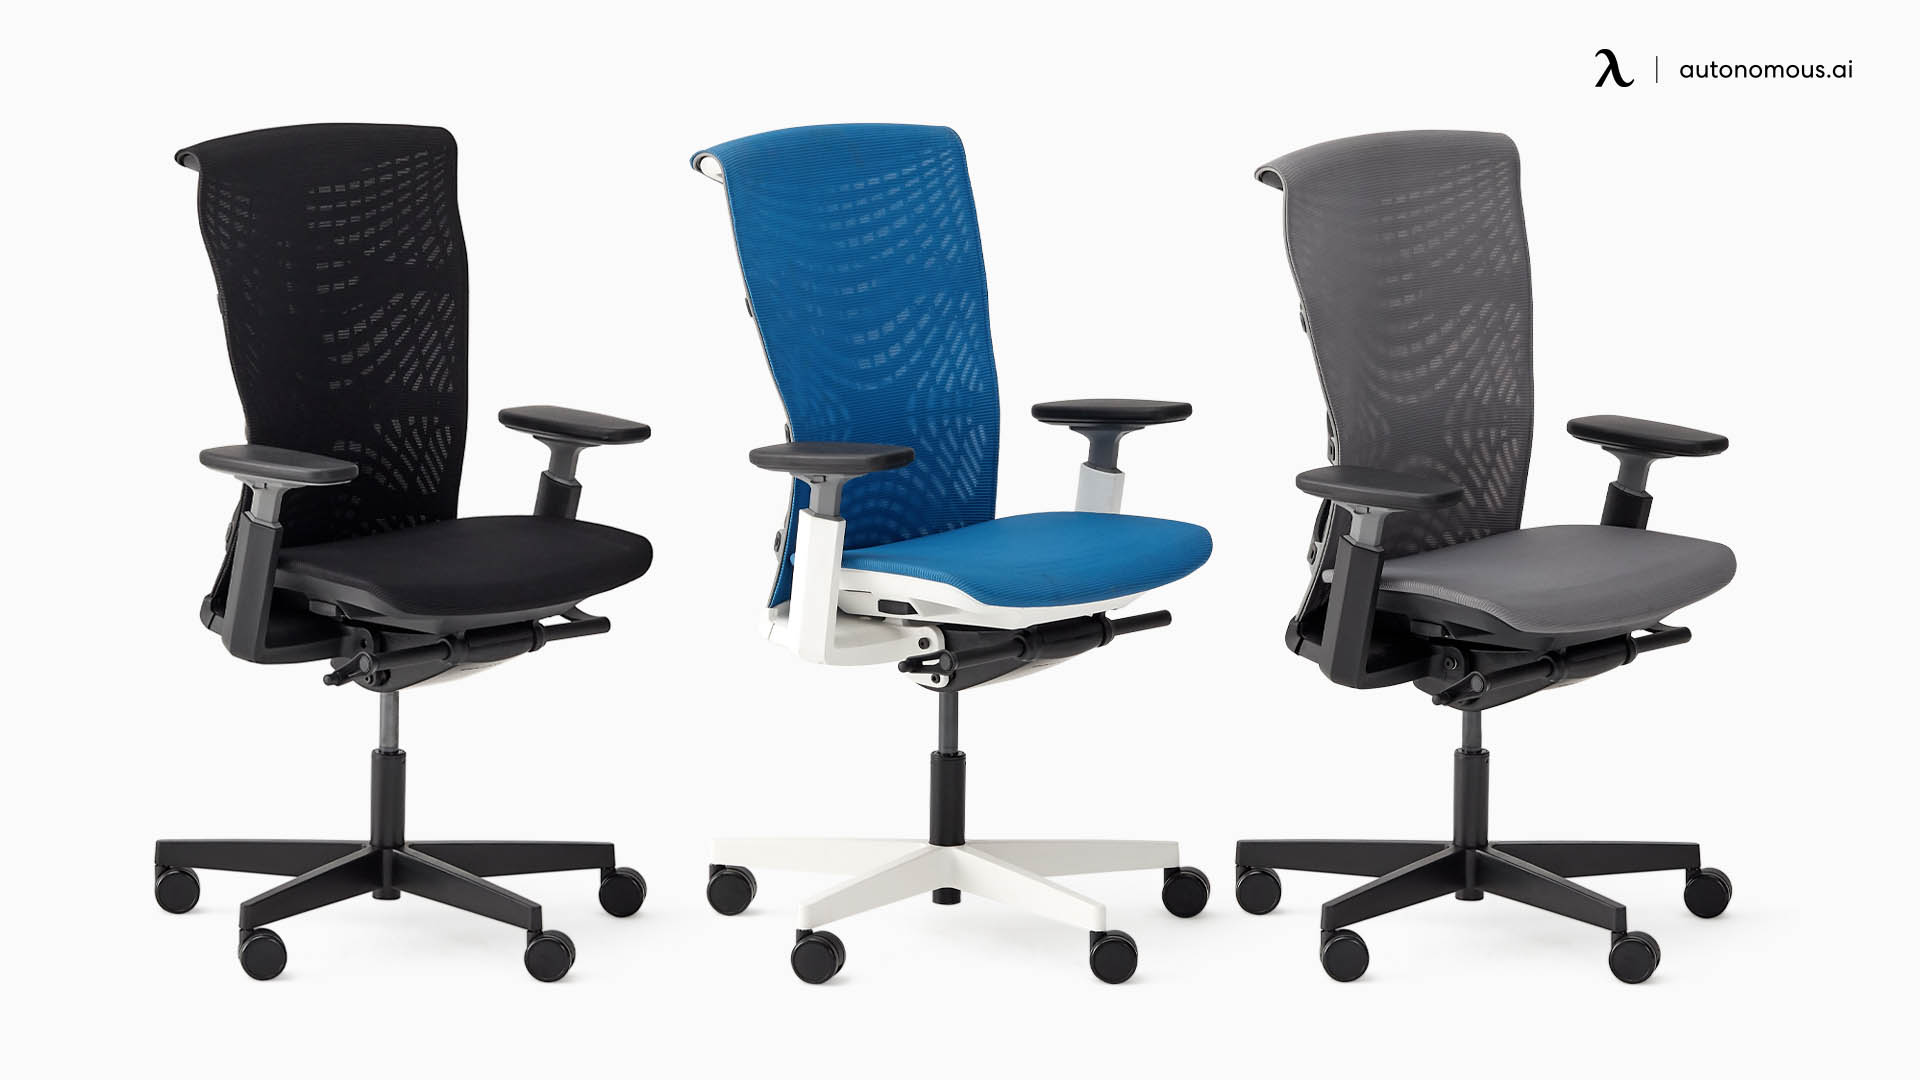 https://cdn.autonomous.ai/static/upload/images/common/upload/20210528/The-5-Best-Office-Chairs-for-Pregnancy-in-2021-Reviews_9a28817e774.jpg